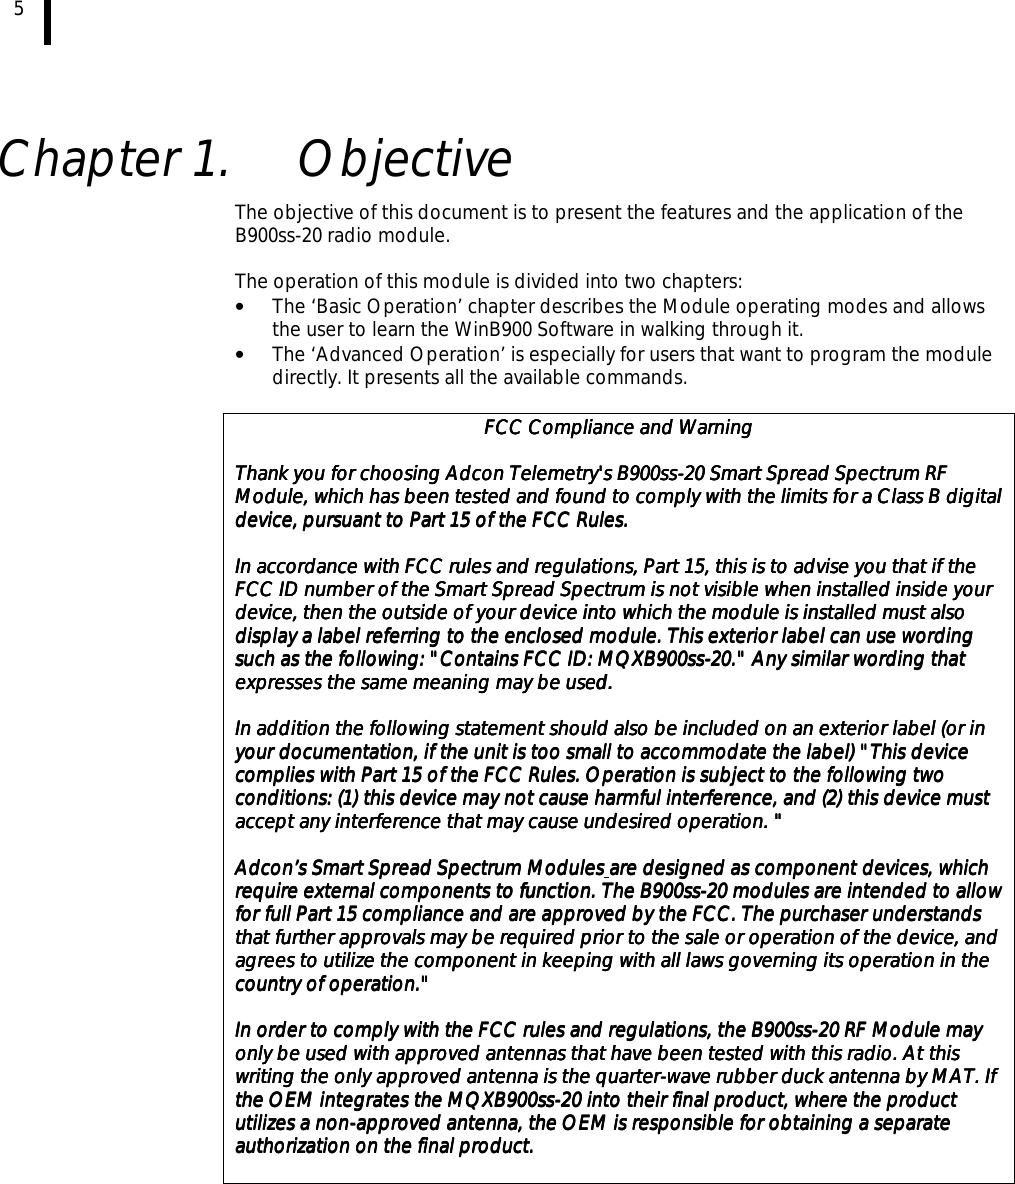 5    Chapter 1.  Objective The objective of this document is to present the features and the application of the B900ss-20 radio module.  The operation of this module is divided into two chapters: •  The ‘Basic Operation’ chapter describes the Module operating modes and allows the user to learn the WinB900 Software in walking through it. •  The ‘Advanced Operation’ is especially for users that want to program the module directly. It presents all the available commands.  FCC Compliance and WarningFCC Compliance and WarningFCC Compliance and WarningFCC Compliance and Warning        Thank you for choosing Adcon Telemetry&apos;s B900ssThank you for choosing Adcon Telemetry&apos;s B900ssThank you for choosing Adcon Telemetry&apos;s B900ssThank you for choosing Adcon Telemetry&apos;s B900ss----20 Smart Spread Spectrum RF 20 Smart Spread Spectrum RF 20 Smart Spread Spectrum RF 20 Smart Spread Spectrum RF Module, which has been tested and found to comply with the limits for a Class B digitaModule, which has been tested and found to comply with the limits for a Class B digitaModule, which has been tested and found to comply with the limits for a Class B digitaModule, which has been tested and found to comply with the limits for a Class B digital l l l device, pursuant to Part 15 of the FCC Rules.device, pursuant to Part 15 of the FCC Rules.device, pursuant to Part 15 of the FCC Rules.device, pursuant to Part 15 of the FCC Rules.        In accordance with FCC rules and regulations, Part 15, this is to advise you that if the In accordance with FCC rules and regulations, Part 15, this is to advise you that if the In accordance with FCC rules and regulations, Part 15, this is to advise you that if the In accordance with FCC rules and regulations, Part 15, this is to advise you that if the FCC ID number of the Smart Spread Spectrum is not visible when installed inside your FCC ID number of the Smart Spread Spectrum is not visible when installed inside your FCC ID number of the Smart Spread Spectrum is not visible when installed inside your FCC ID number of the Smart Spread Spectrum is not visible when installed inside your device, then the outside of your device, then the outside of your device, then the outside of your device, then the outside of your device into which the module is installed must also device into which the module is installed must also device into which the module is installed must also device into which the module is installed must also display a label referring to the enclosed module. This exterior label can use wording display a label referring to the enclosed module. This exterior label can use wording display a label referring to the enclosed module. This exterior label can use wording display a label referring to the enclosed module. This exterior label can use wording such as the following: &quot;Contains FCC ID: MQXB900sssuch as the following: &quot;Contains FCC ID: MQXB900sssuch as the following: &quot;Contains FCC ID: MQXB900sssuch as the following: &quot;Contains FCC ID: MQXB900ss----20.&quot; Any similar wording that 20.&quot; Any similar wording that 20.&quot; Any similar wording that 20.&quot; Any similar wording that expresses the same meaning may be useexpresses the same meaning may be useexpresses the same meaning may be useexpresses the same meaning may be used. d. d. d.         In addition the following statement should also be included on an exterior label (or in In addition the following statement should also be included on an exterior label (or in In addition the following statement should also be included on an exterior label (or in In addition the following statement should also be included on an exterior label (or in your documentation, if the unit is too small to accommodate the label) &quot;your documentation, if the unit is too small to accommodate the label) &quot;your documentation, if the unit is too small to accommodate the label) &quot;your documentation, if the unit is too small to accommodate the label) &quot;This device This device This device This device complies with Part 15 of the FCC Rules. Operation is subject to the following tcomplies with Part 15 of the FCC Rules. Operation is subject to the following tcomplies with Part 15 of the FCC Rules. Operation is subject to the following tcomplies with Part 15 of the FCC Rules. Operation is subject to the following two wo wo wo conditions: (1) this device may not cause harmful interference, and (2) this device must conditions: (1) this device may not cause harmful interference, and (2) this device must conditions: (1) this device may not cause harmful interference, and (2) this device must conditions: (1) this device may not cause harmful interference, and (2) this device must accept any interference that may cause undesired operation.accept any interference that may cause undesired operation.accept any interference that may cause undesired operation.accept any interference that may cause undesired operation. &quot; &quot; &quot; &quot;        Adcon’s Smart Spread Spectrum ModulesAdcon’s Smart Spread Spectrum ModulesAdcon’s Smart Spread Spectrum ModulesAdcon’s Smart Spread Spectrum Modules    are designed as component devices, which are designed as component devices, which are designed as component devices, which are designed as component devices, which require external comporequire external comporequire external comporequire external components to function. The B900ssnents to function. The B900ssnents to function. The B900ssnents to function. The B900ss----20 modules are intended to allow 20 modules are intended to allow 20 modules are intended to allow 20 modules are intended to allow for full Part 15 compliance and are approved by the FCC. The purchaser understands for full Part 15 compliance and are approved by the FCC. The purchaser understands for full Part 15 compliance and are approved by the FCC. The purchaser understands for full Part 15 compliance and are approved by the FCC. The purchaser understands that further approvals may be required prior to the sale or operation of the device, and that further approvals may be required prior to the sale or operation of the device, and that further approvals may be required prior to the sale or operation of the device, and that further approvals may be required prior to the sale or operation of the device, and agrees to utilize theagrees to utilize theagrees to utilize theagrees to utilize the component in keeping with all laws governing its operation in the  component in keeping with all laws governing its operation in the  component in keeping with all laws governing its operation in the  component in keeping with all laws governing its operation in the country of operation.&quot;country of operation.&quot;country of operation.&quot;country of operation.&quot;        In order to comply with the FCC rules and regulations, the B900ssIn order to comply with the FCC rules and regulations, the B900ssIn order to comply with the FCC rules and regulations, the B900ssIn order to comply with the FCC rules and regulations, the B900ss----20 RF Module may 20 RF Module may 20 RF Module may 20 RF Module may only be used with approved antennas that have been tested with this radio. At thisonly be used with approved antennas that have been tested with this radio. At thisonly be used with approved antennas that have been tested with this radio. At thisonly be used with approved antennas that have been tested with this radio. At this    writing the only approved antenna is the quarterwriting the only approved antenna is the quarterwriting the only approved antenna is the quarterwriting the only approved antenna is the quarter----wave rubber duck antenna by MAT. If wave rubber duck antenna by MAT. If wave rubber duck antenna by MAT. If wave rubber duck antenna by MAT. If the OEM integrates the MQXB900ssthe OEM integrates the MQXB900ssthe OEM integrates the MQXB900ssthe OEM integrates the MQXB900ss----20 into their final product, where the product 20 into their final product, where the product 20 into their final product, where the product 20 into their final product, where the product utilizes a nonutilizes a nonutilizes a nonutilizes a non----approved antenna, the OEM is responsible for obtaining a separate approved antenna, the OEM is responsible for obtaining a separate approved antenna, the OEM is responsible for obtaining a separate approved antenna, the OEM is responsible for obtaining a separate authorizaauthorizaauthorizaauthorization on the final product.tion on the final product.tion on the final product.tion on the final product.        